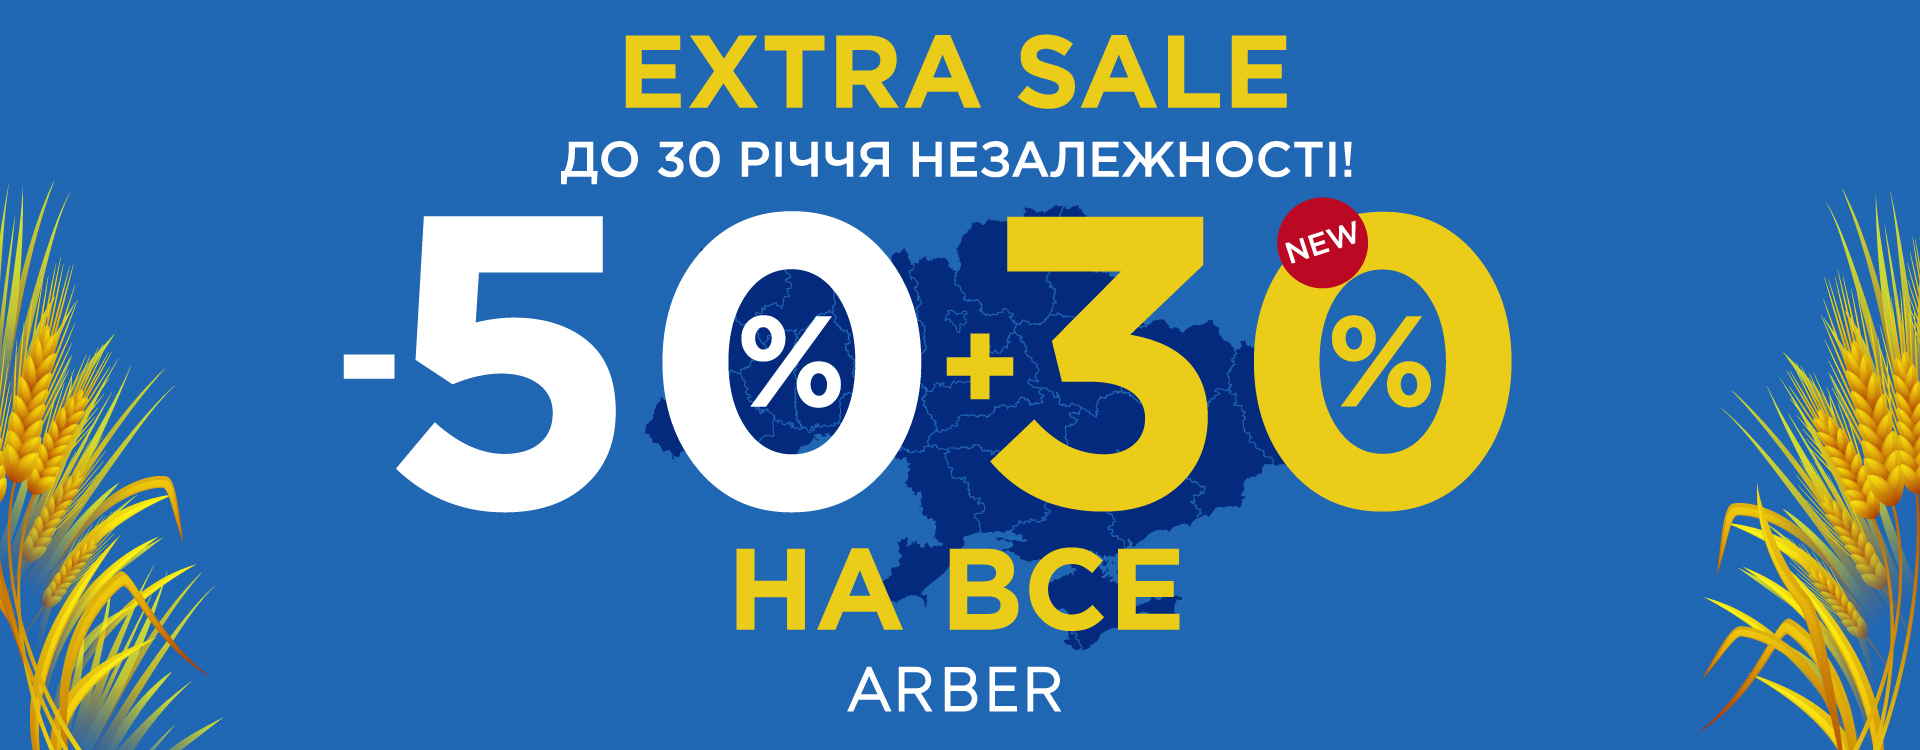 EXTRA SALE up to -50% discount from Arber